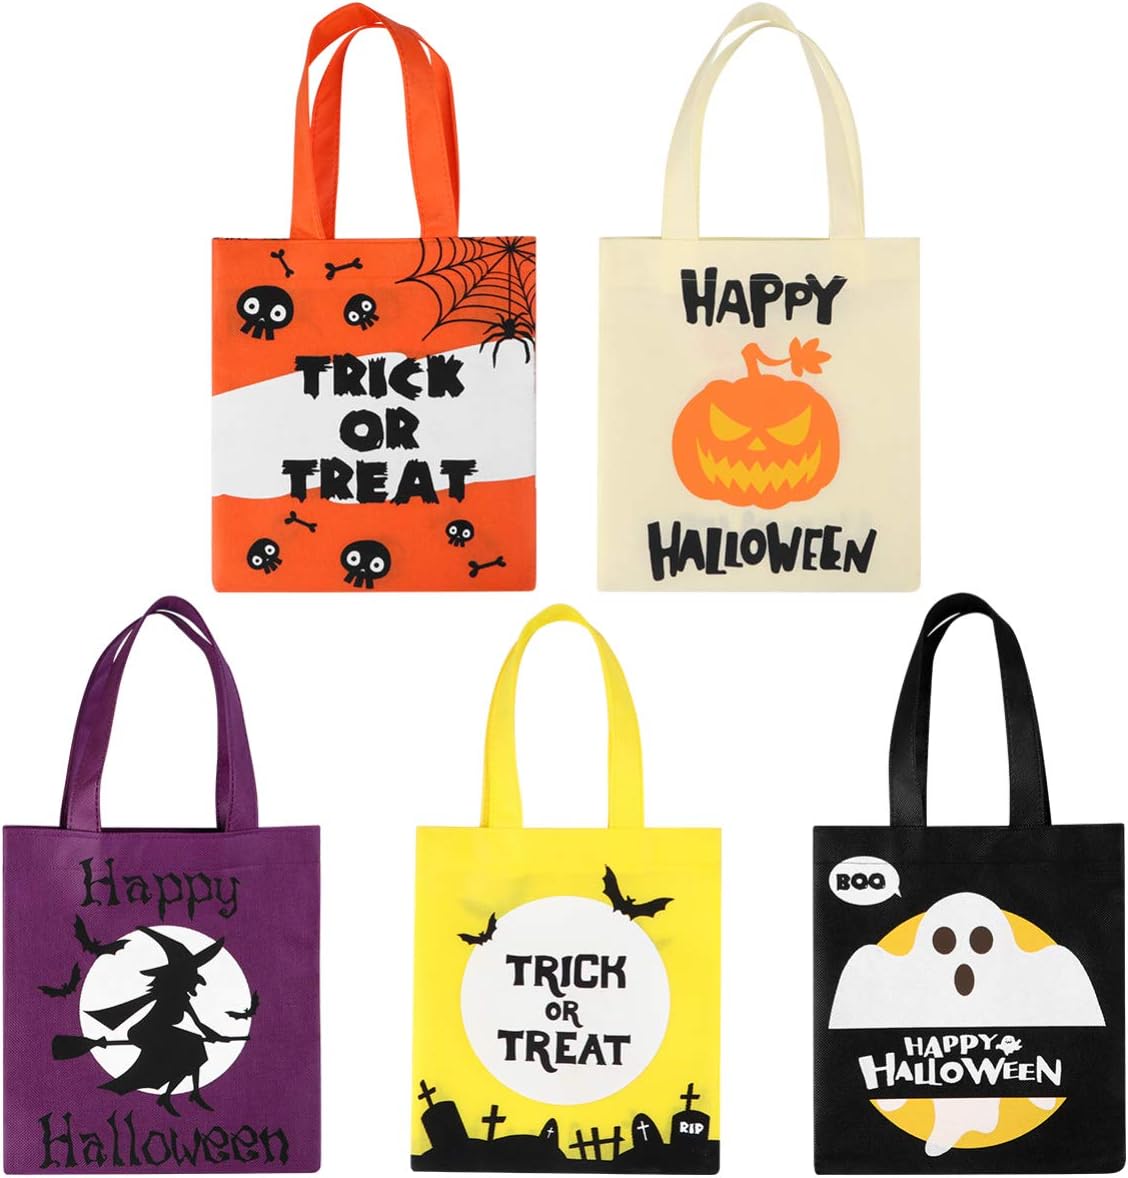 I purchased these bags for my adult Halloween party. They are perfect, in size and design and I am sure my guests will love them like I do.